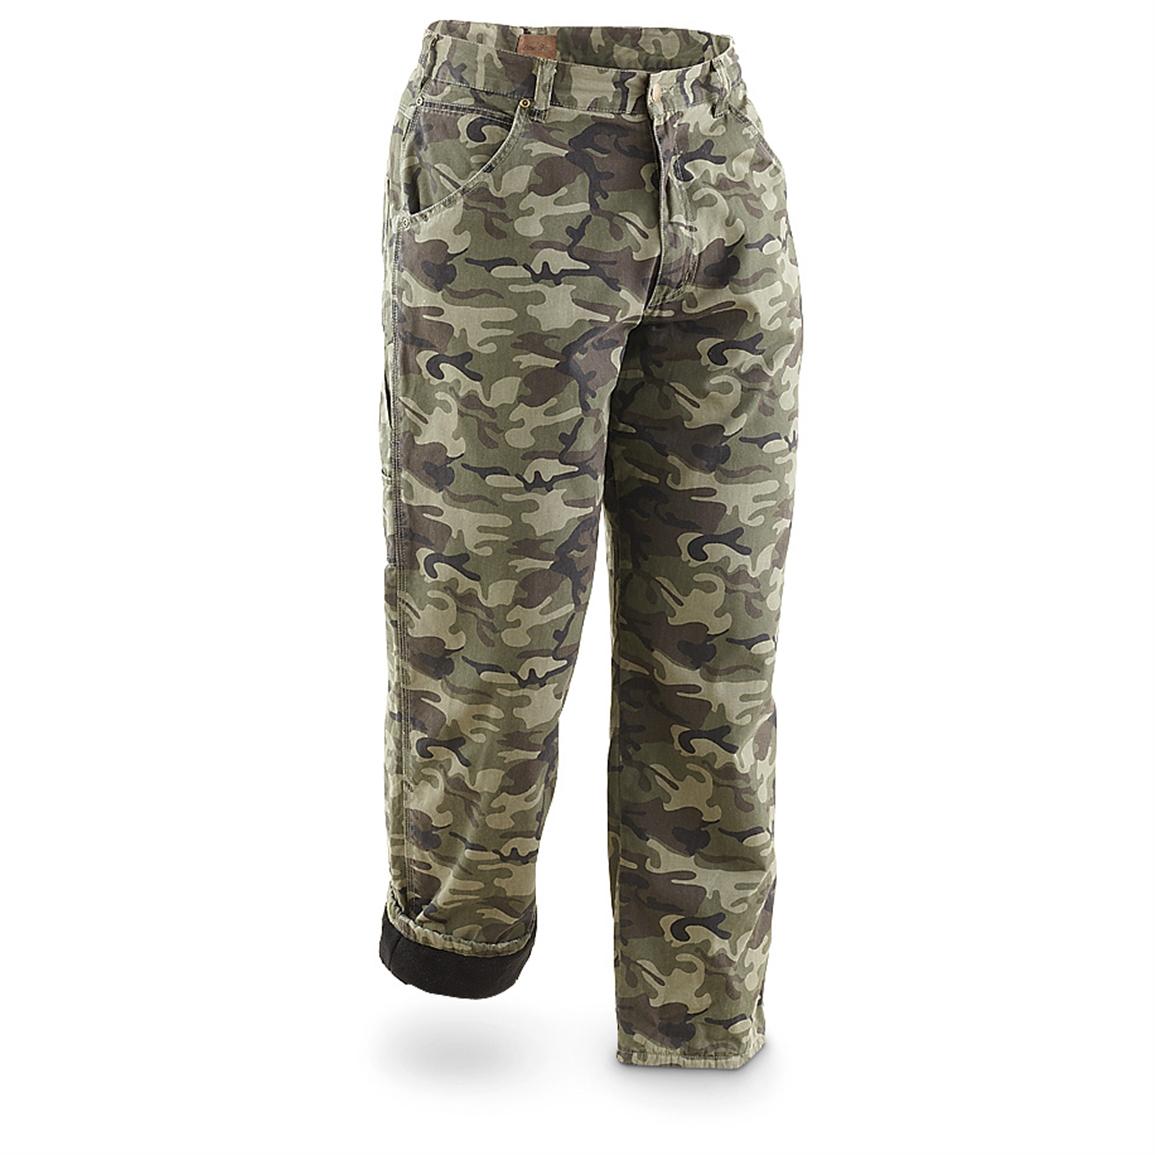 flannel lined camouflage pants